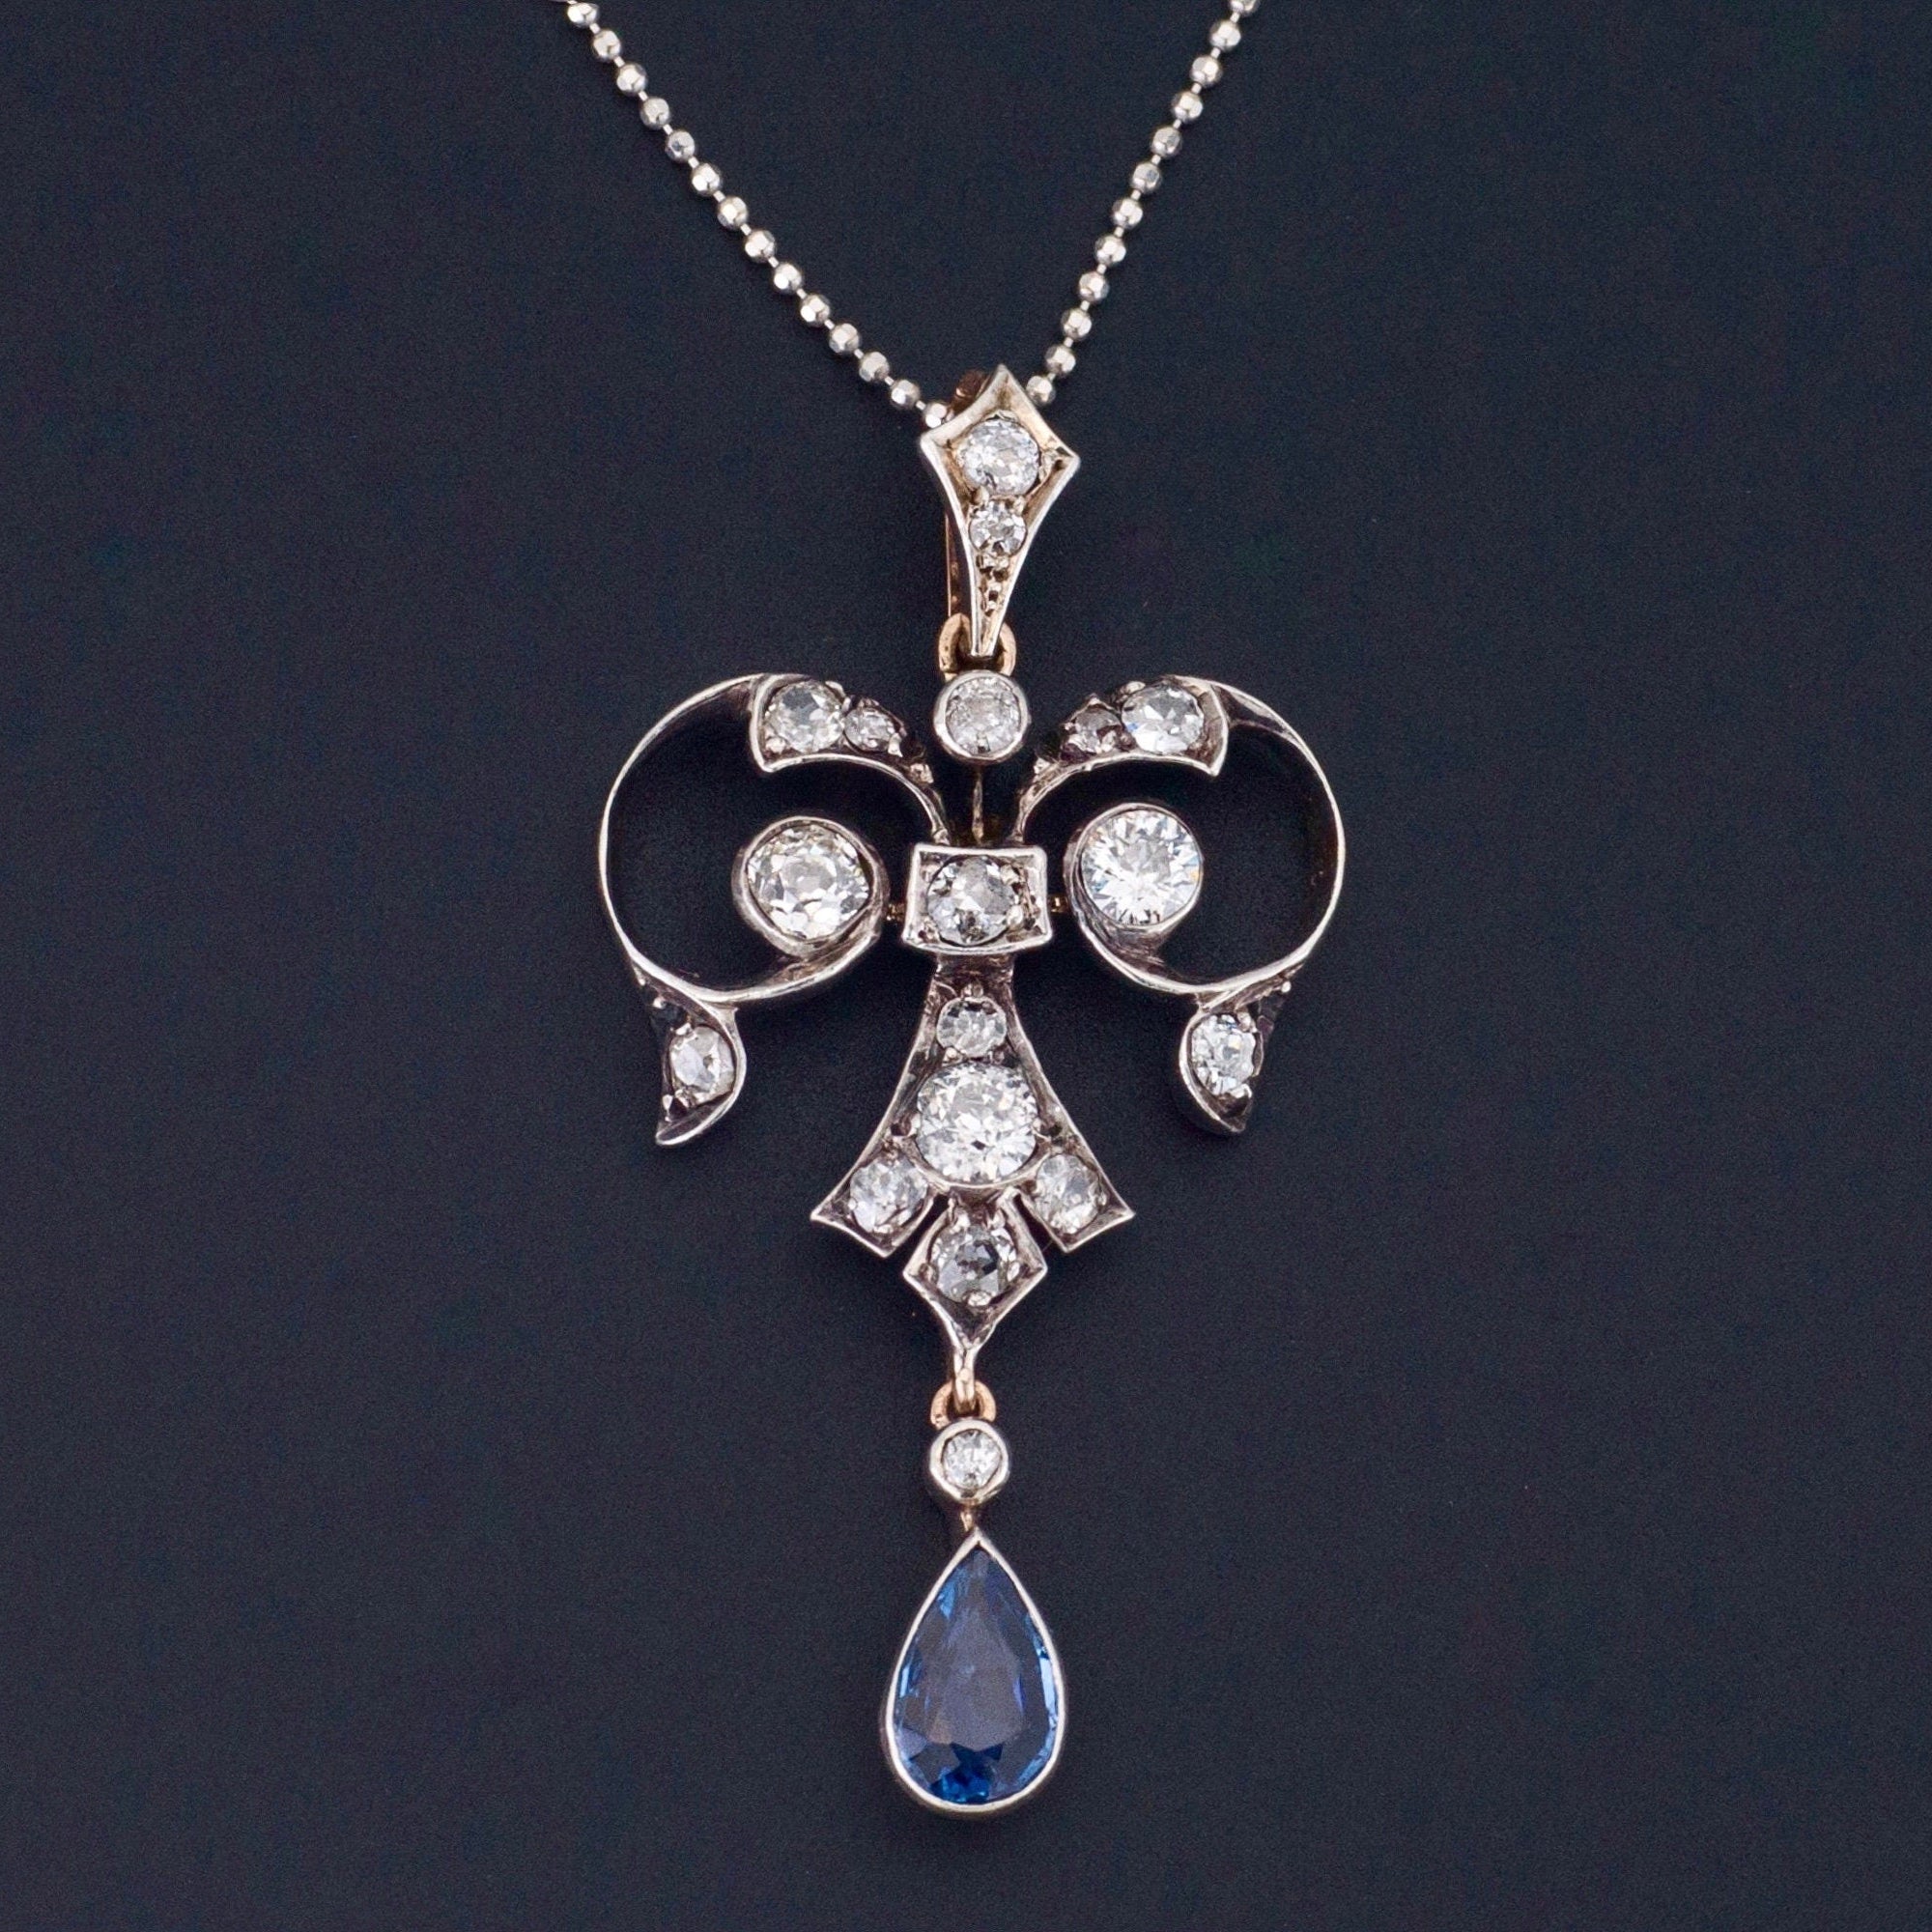 Antique Diamond and Sapphire Pendant | Silver Topped 14k Gold Pendant on Optional 14k Chain 